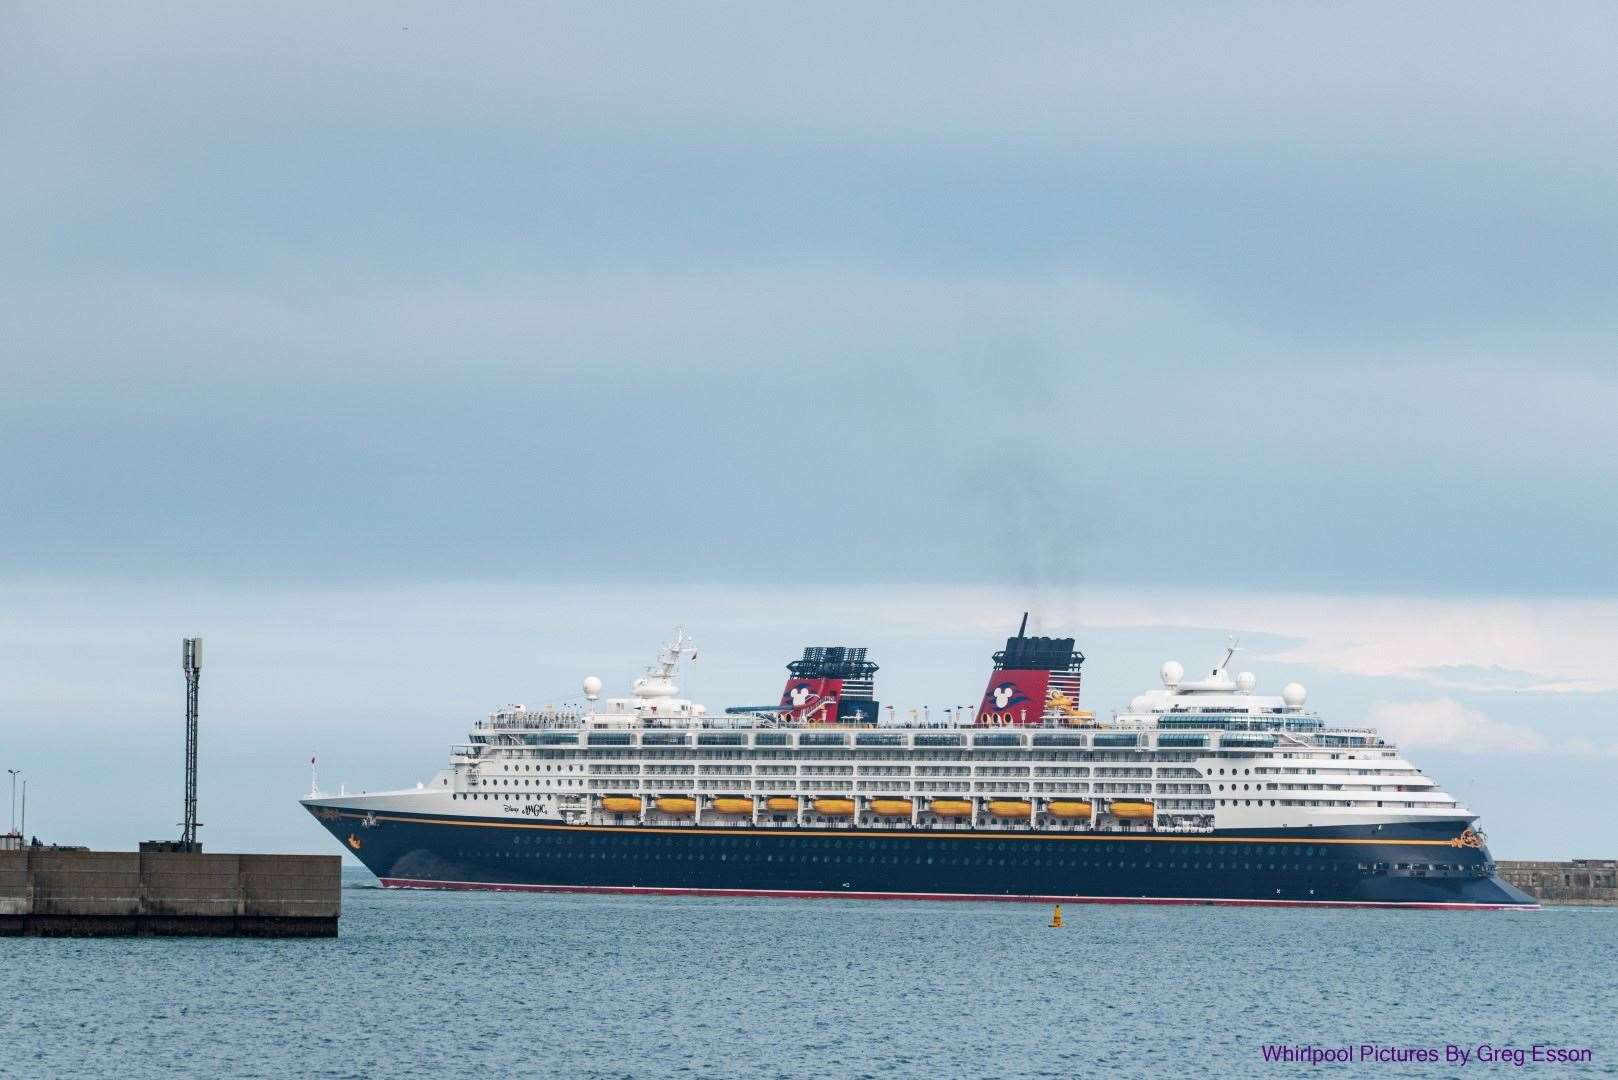 Disney Magic was given a good send-off as it left Dover. Picture: Greg Esson